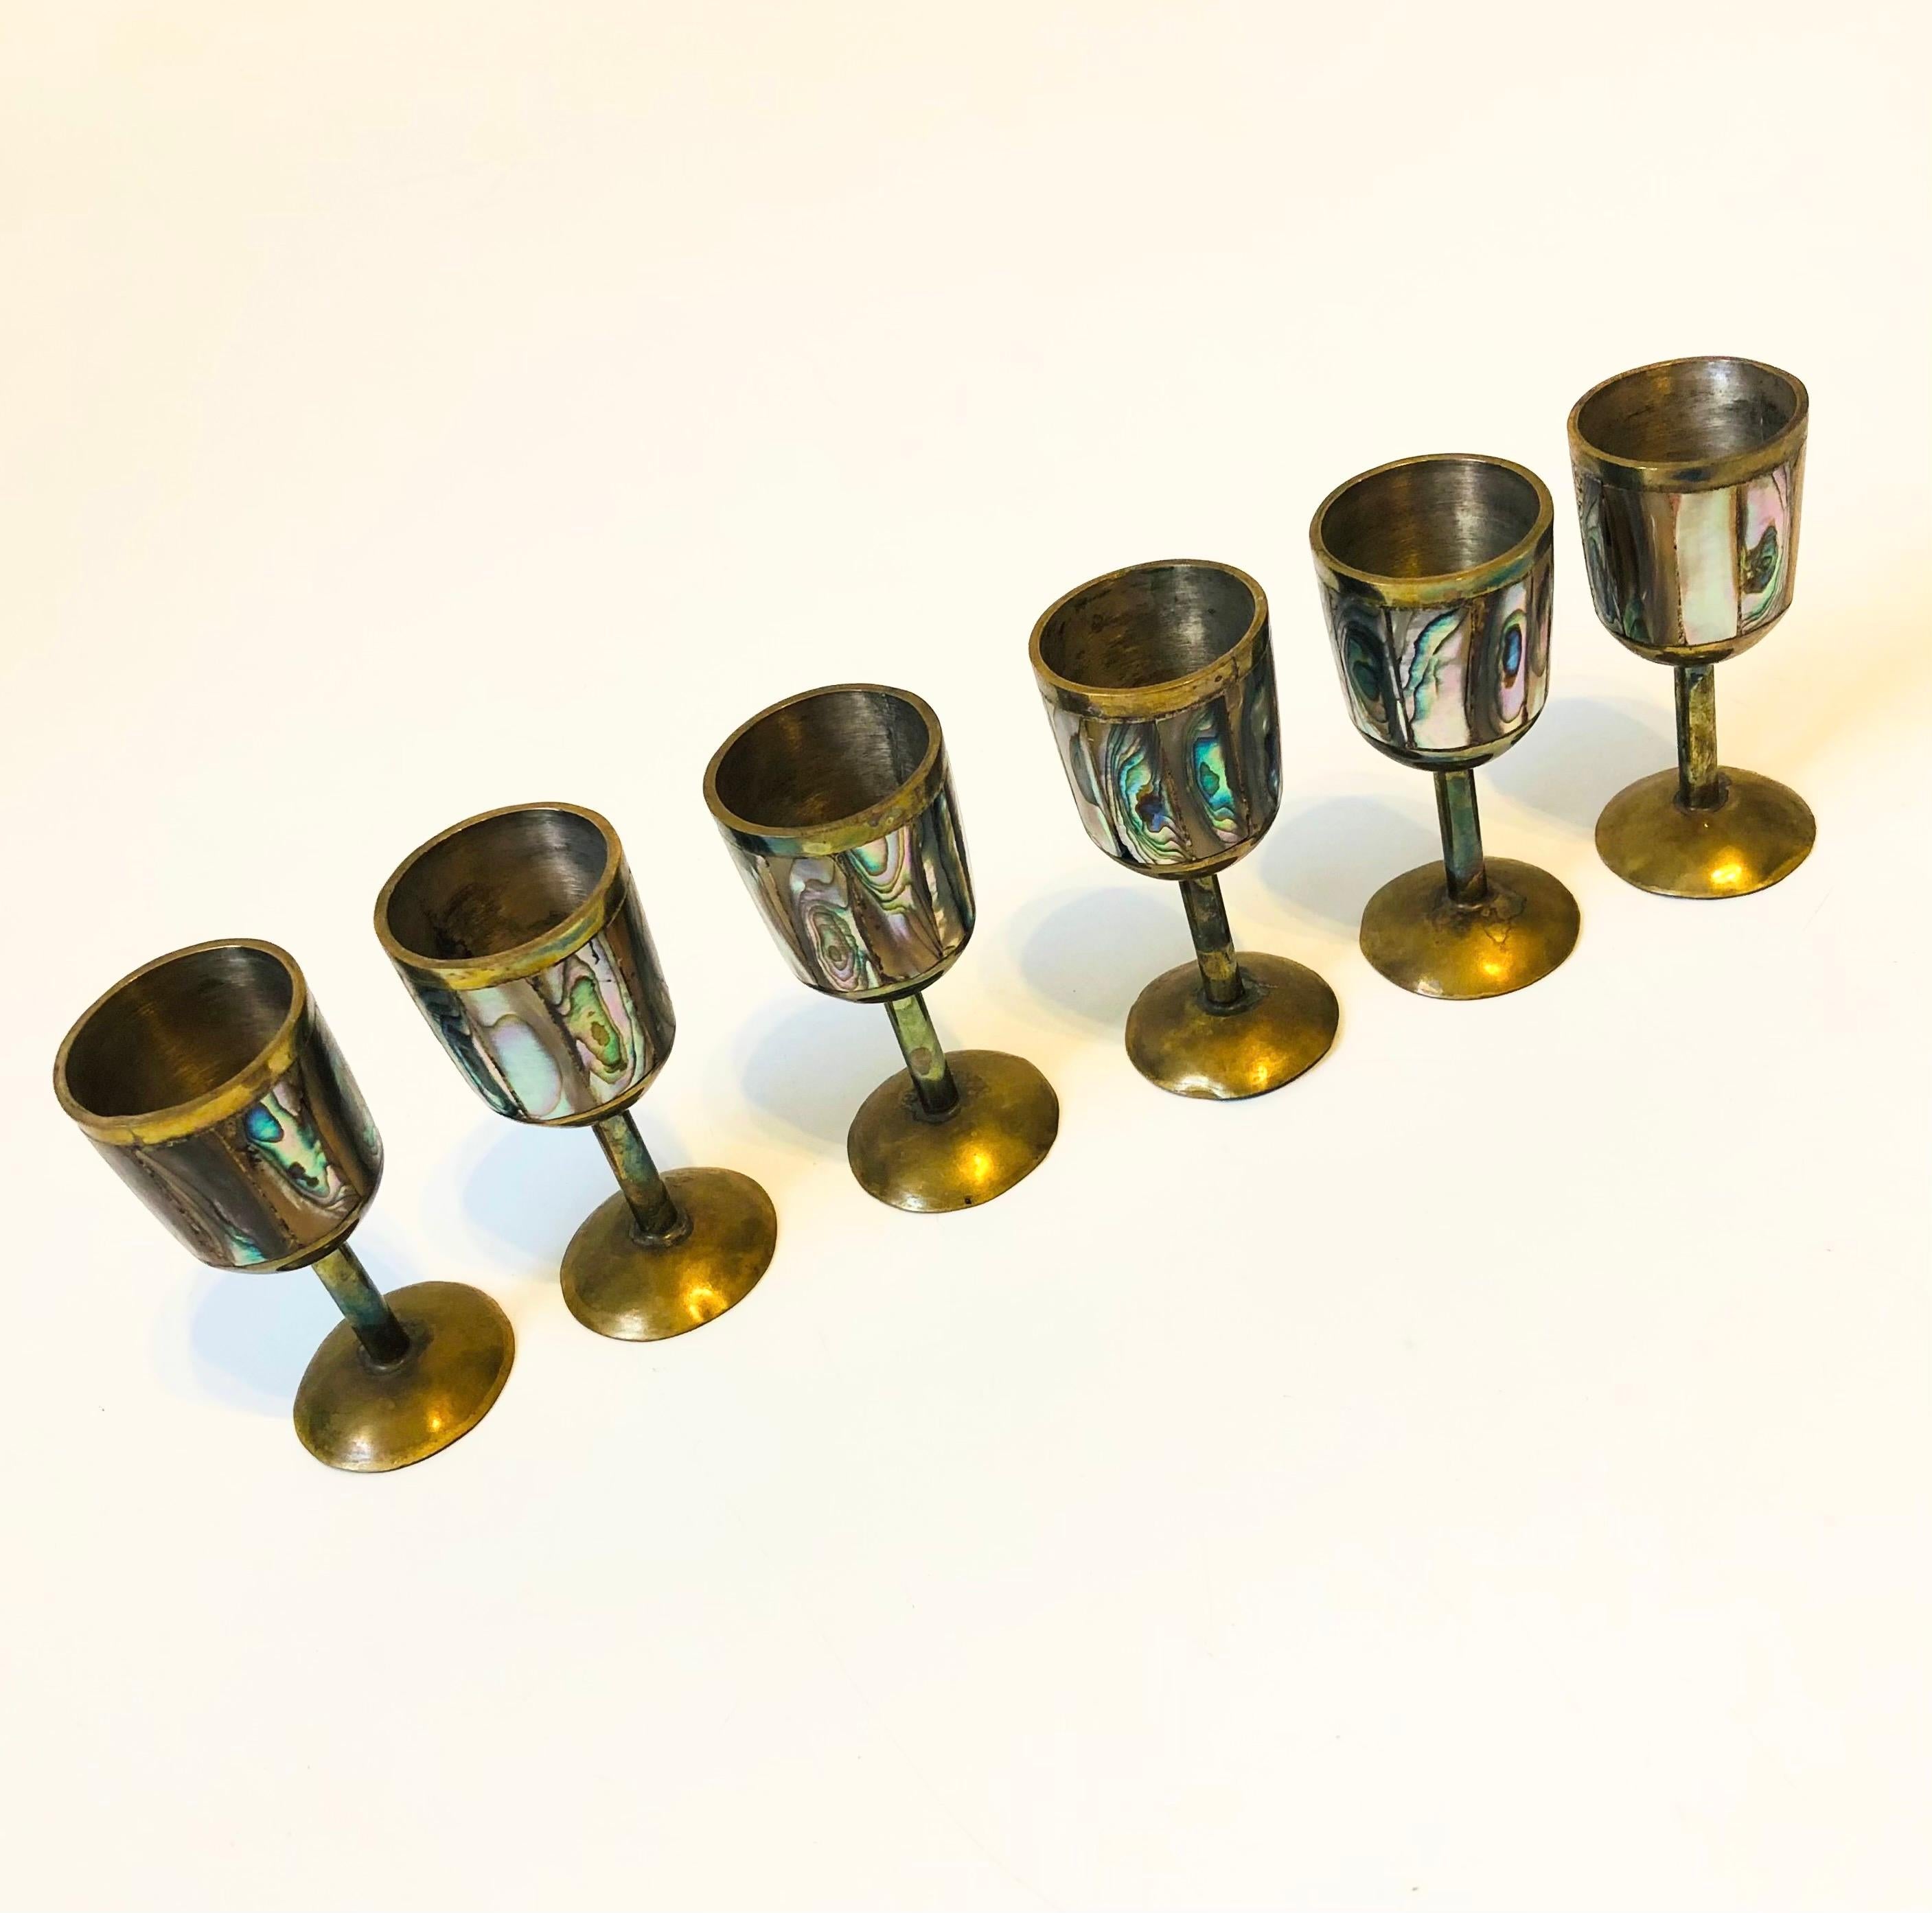 A set of 6 vintage cordials made of brass with mother of pearl inlay. Beautiful natural variation to the mother of pearl.

